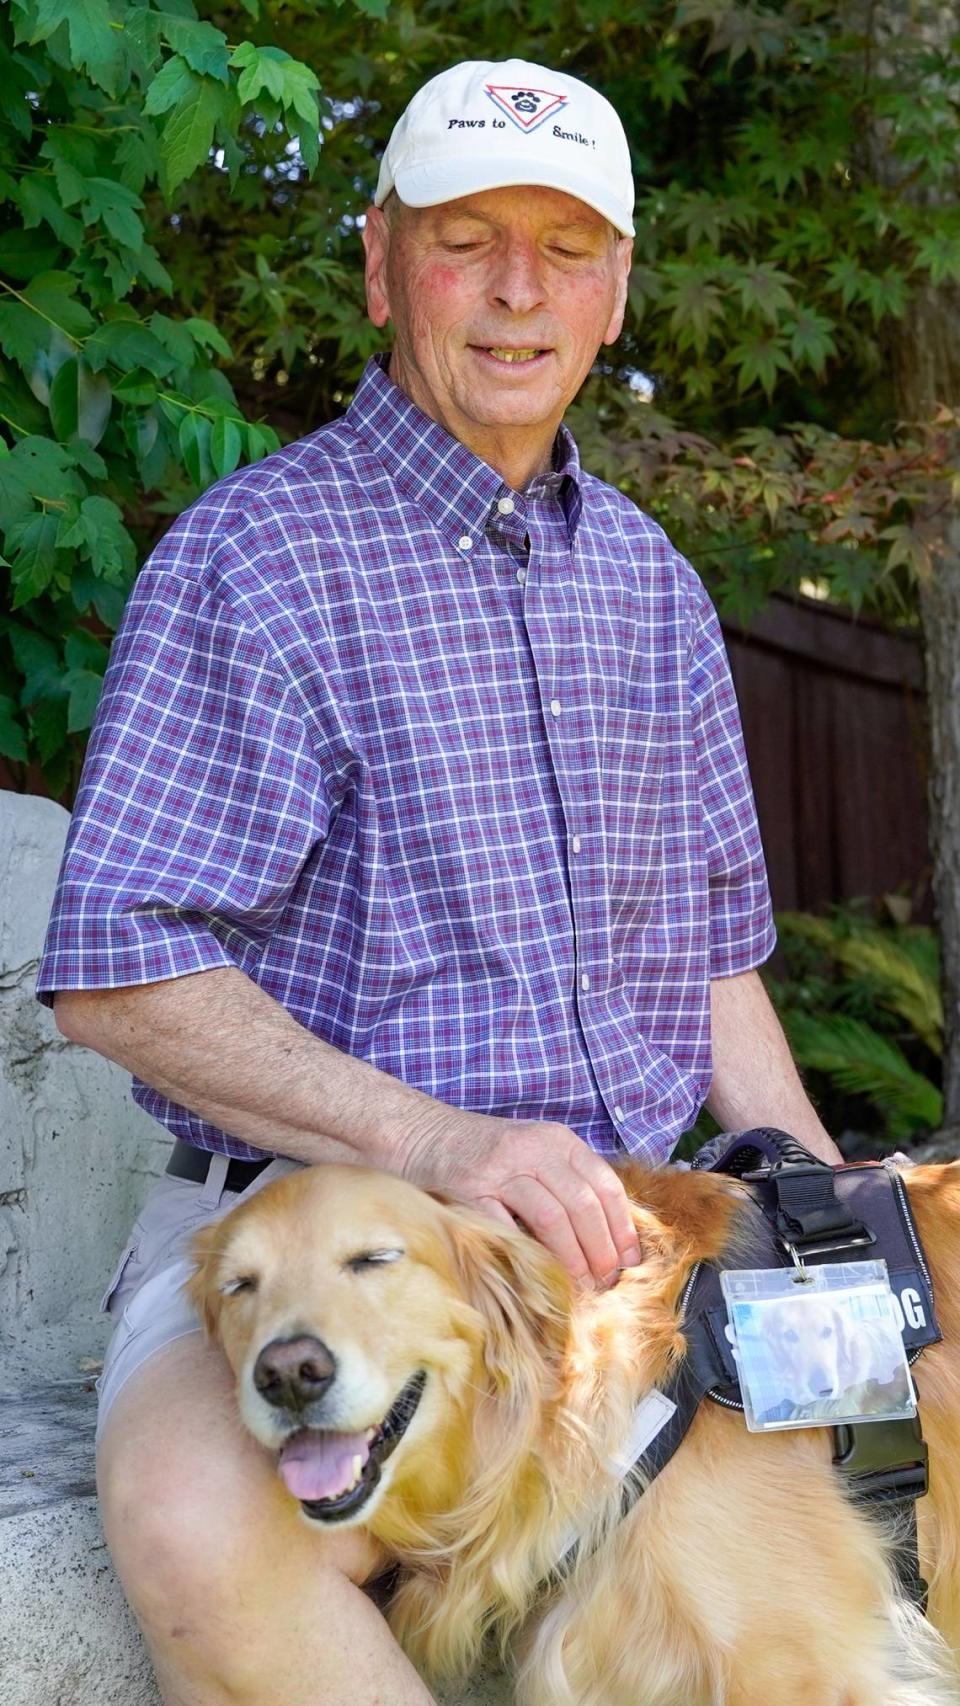 Dan Sievert, founder of Golden Missions of America, pets his service dog, Cooper. Sievert and his golden retrievers have made 55 missions across the United States over the past decade, helping victims of tragedies work through their trauma. John Lynch/jlynch@thetribunenews.com